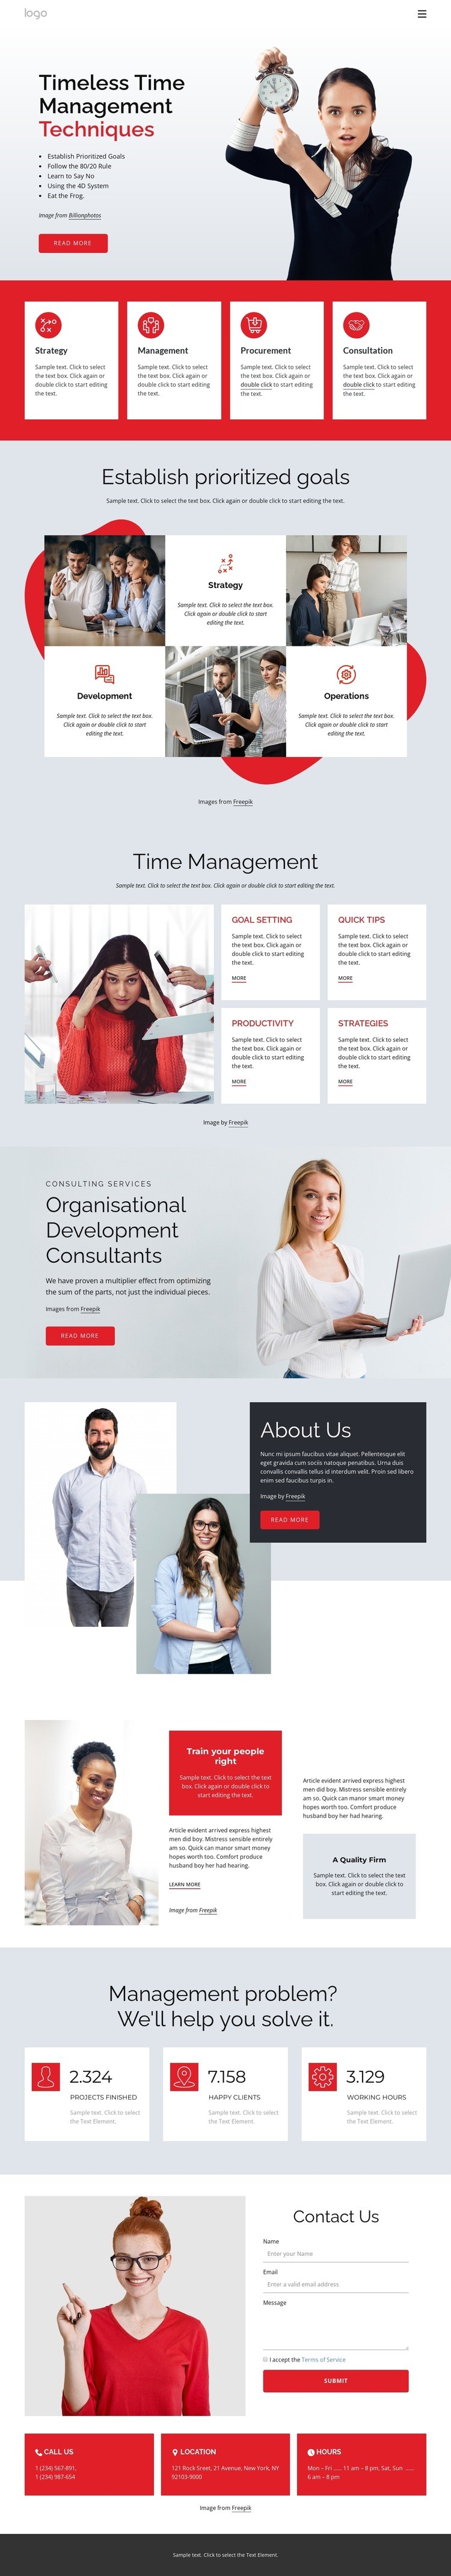 Time management company Web Page Design